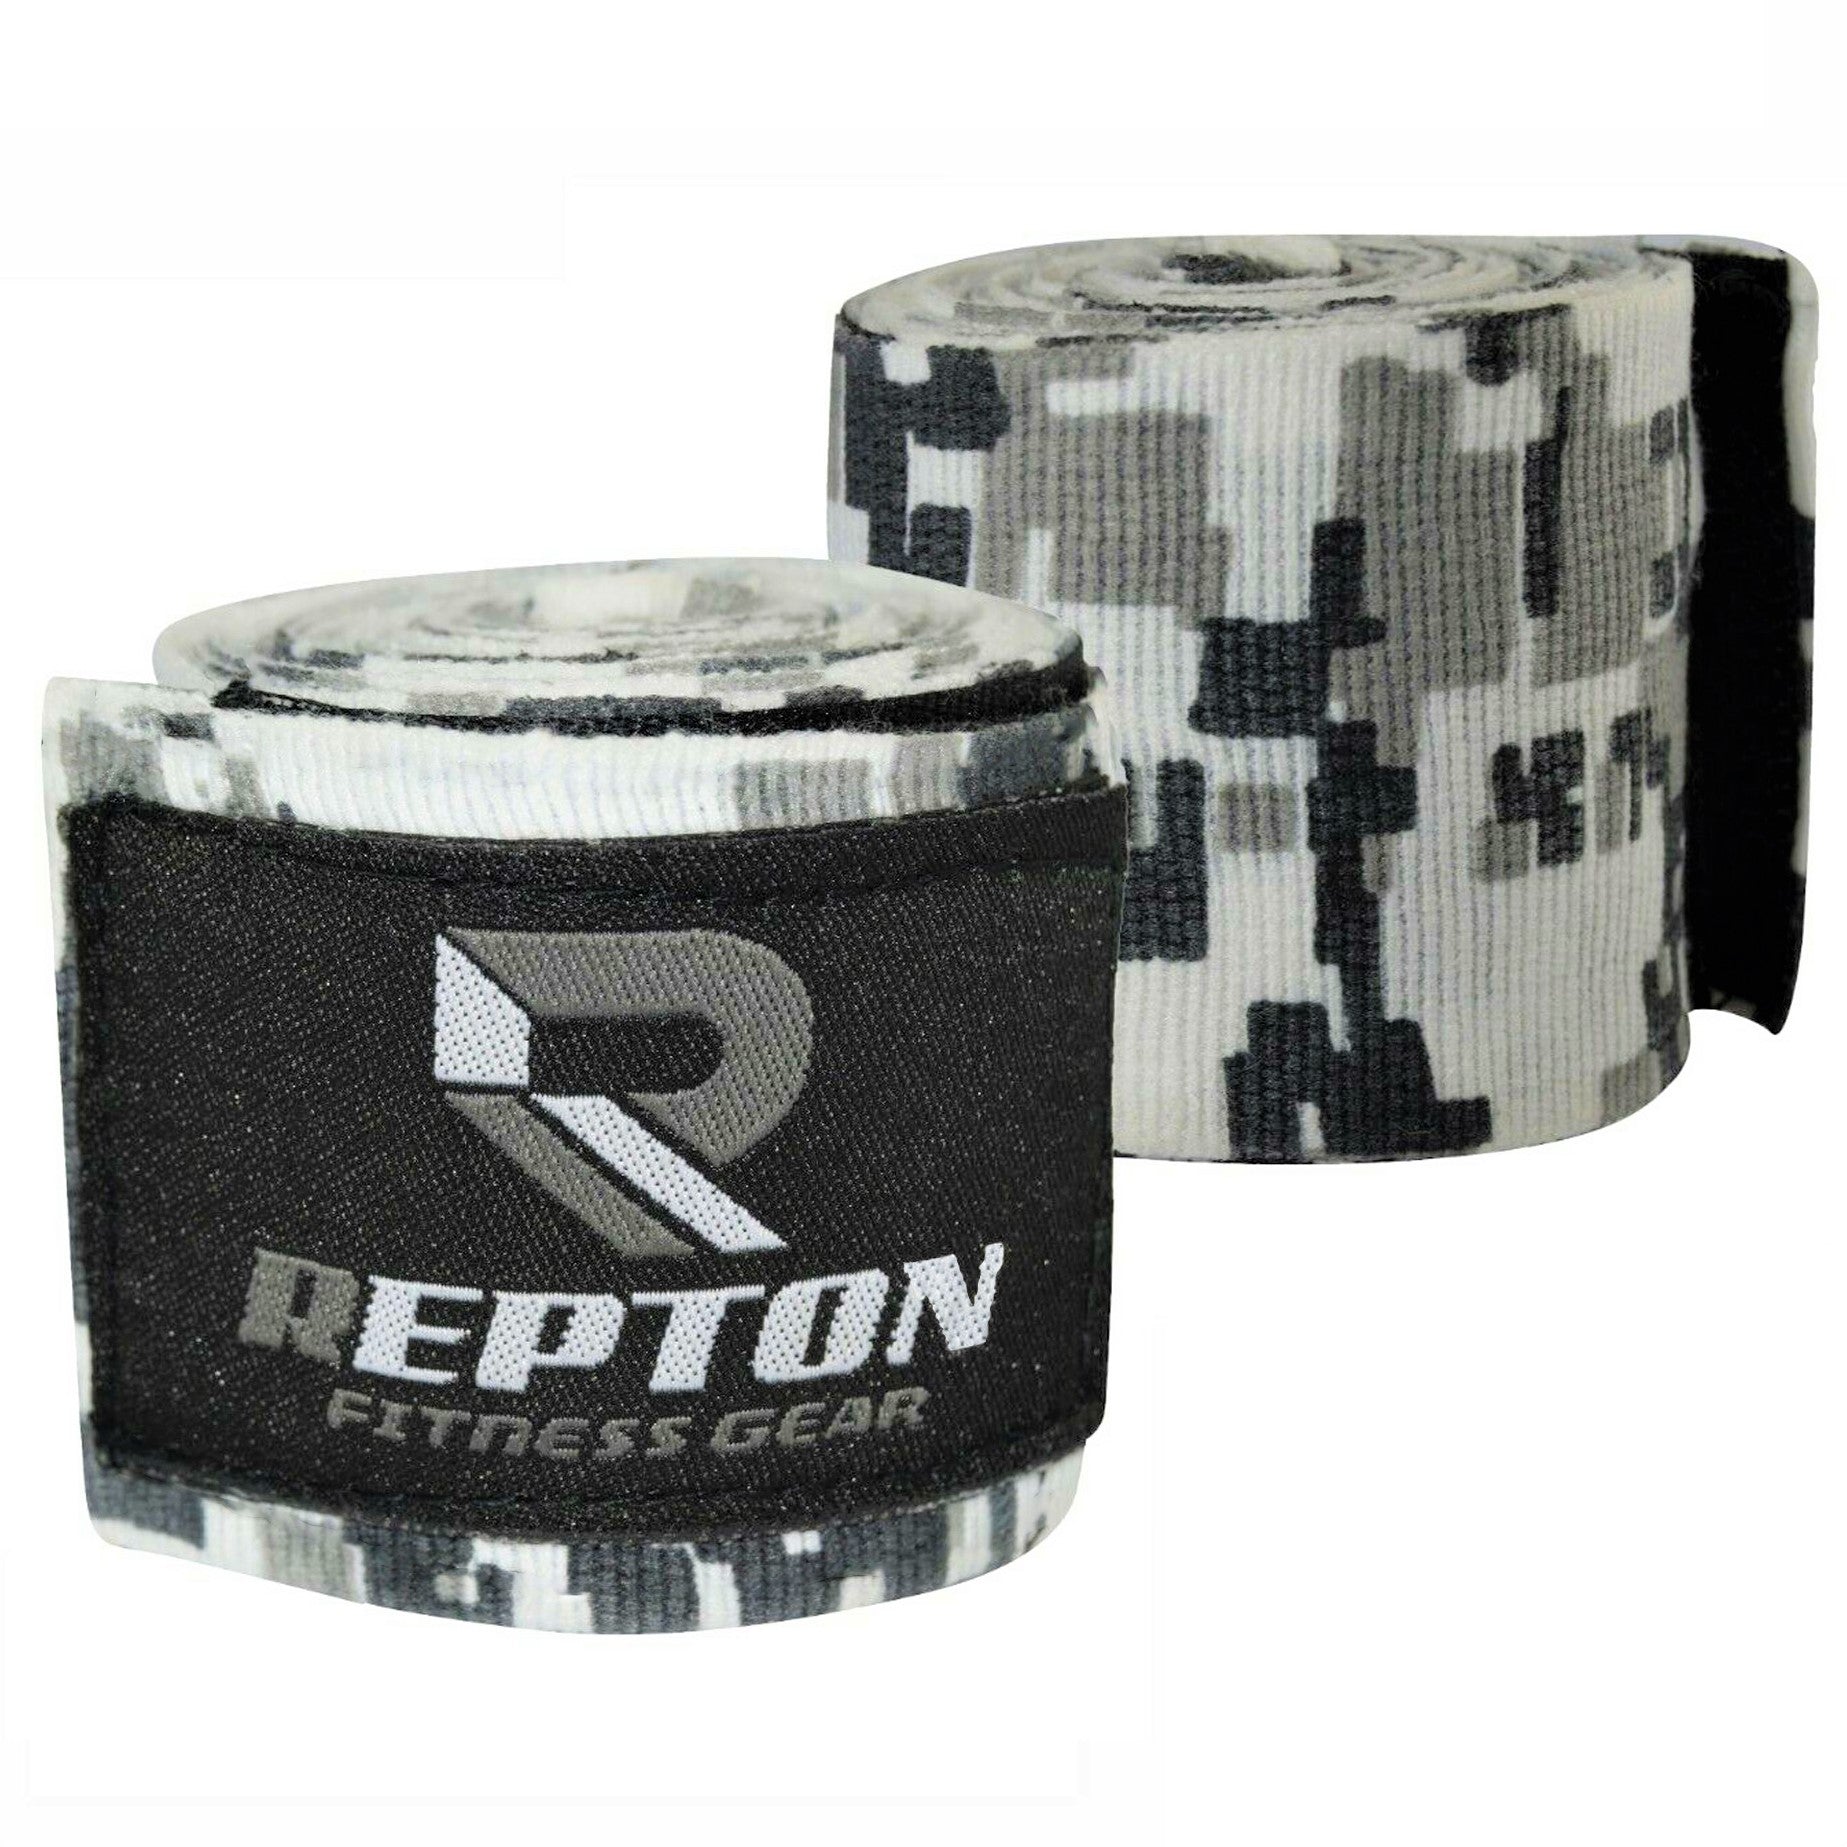 Boxing Hand Wraps for Men- Cotton Hand Gloves with Hook & Loop Strap & Thumb Loop -Elasticated Bandages Wrist Support tape - Great for MMA, Muay Thai, Kickboxing- Unisex Adult Pair Repton Fitness and Boxing Gears